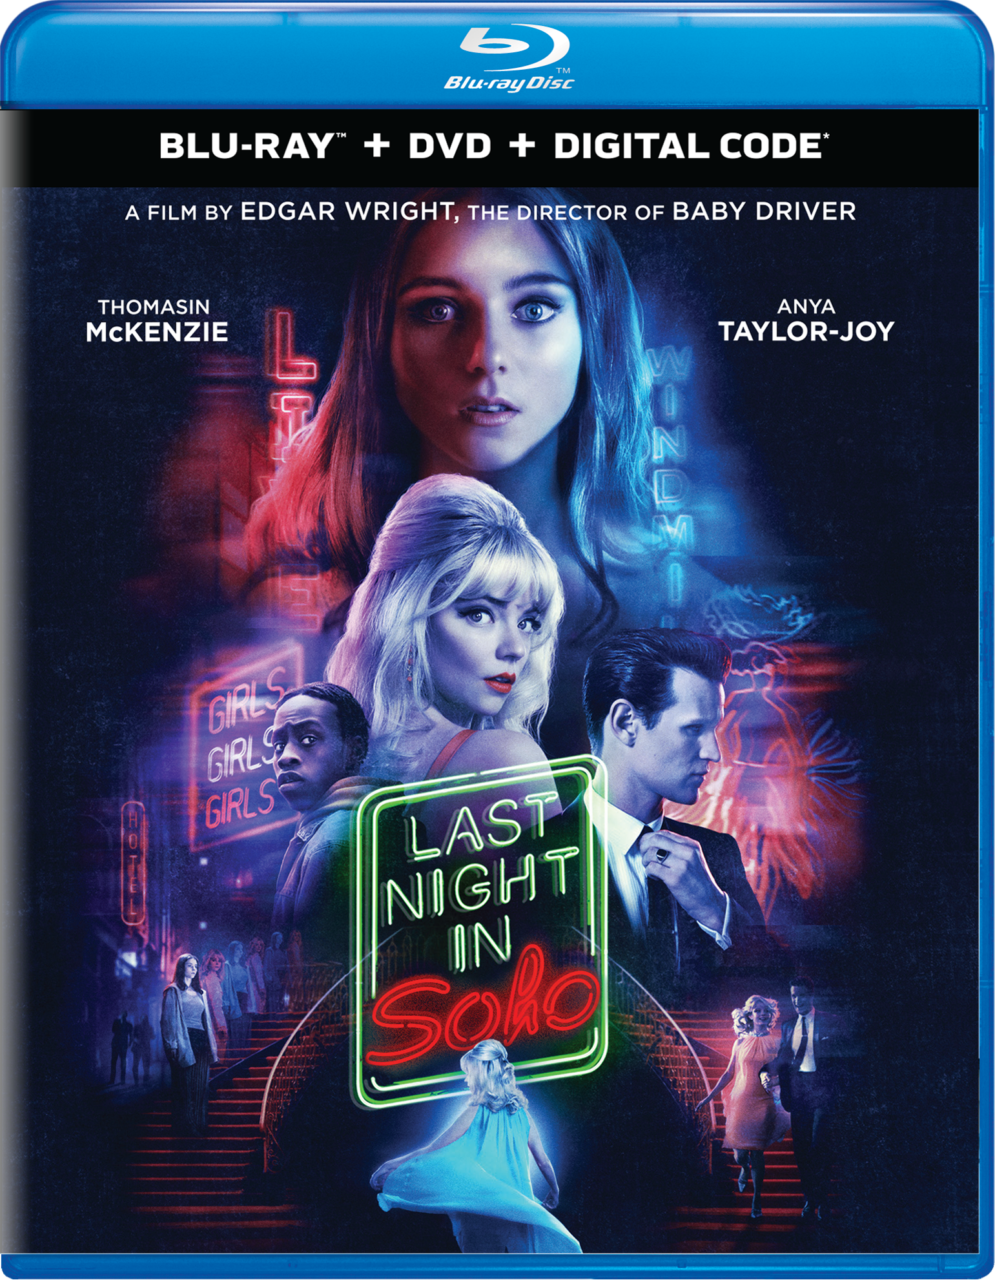 Last Night In Soho Blu-Ray cover (Universal Pictures Home Entertainment/Focus Features)